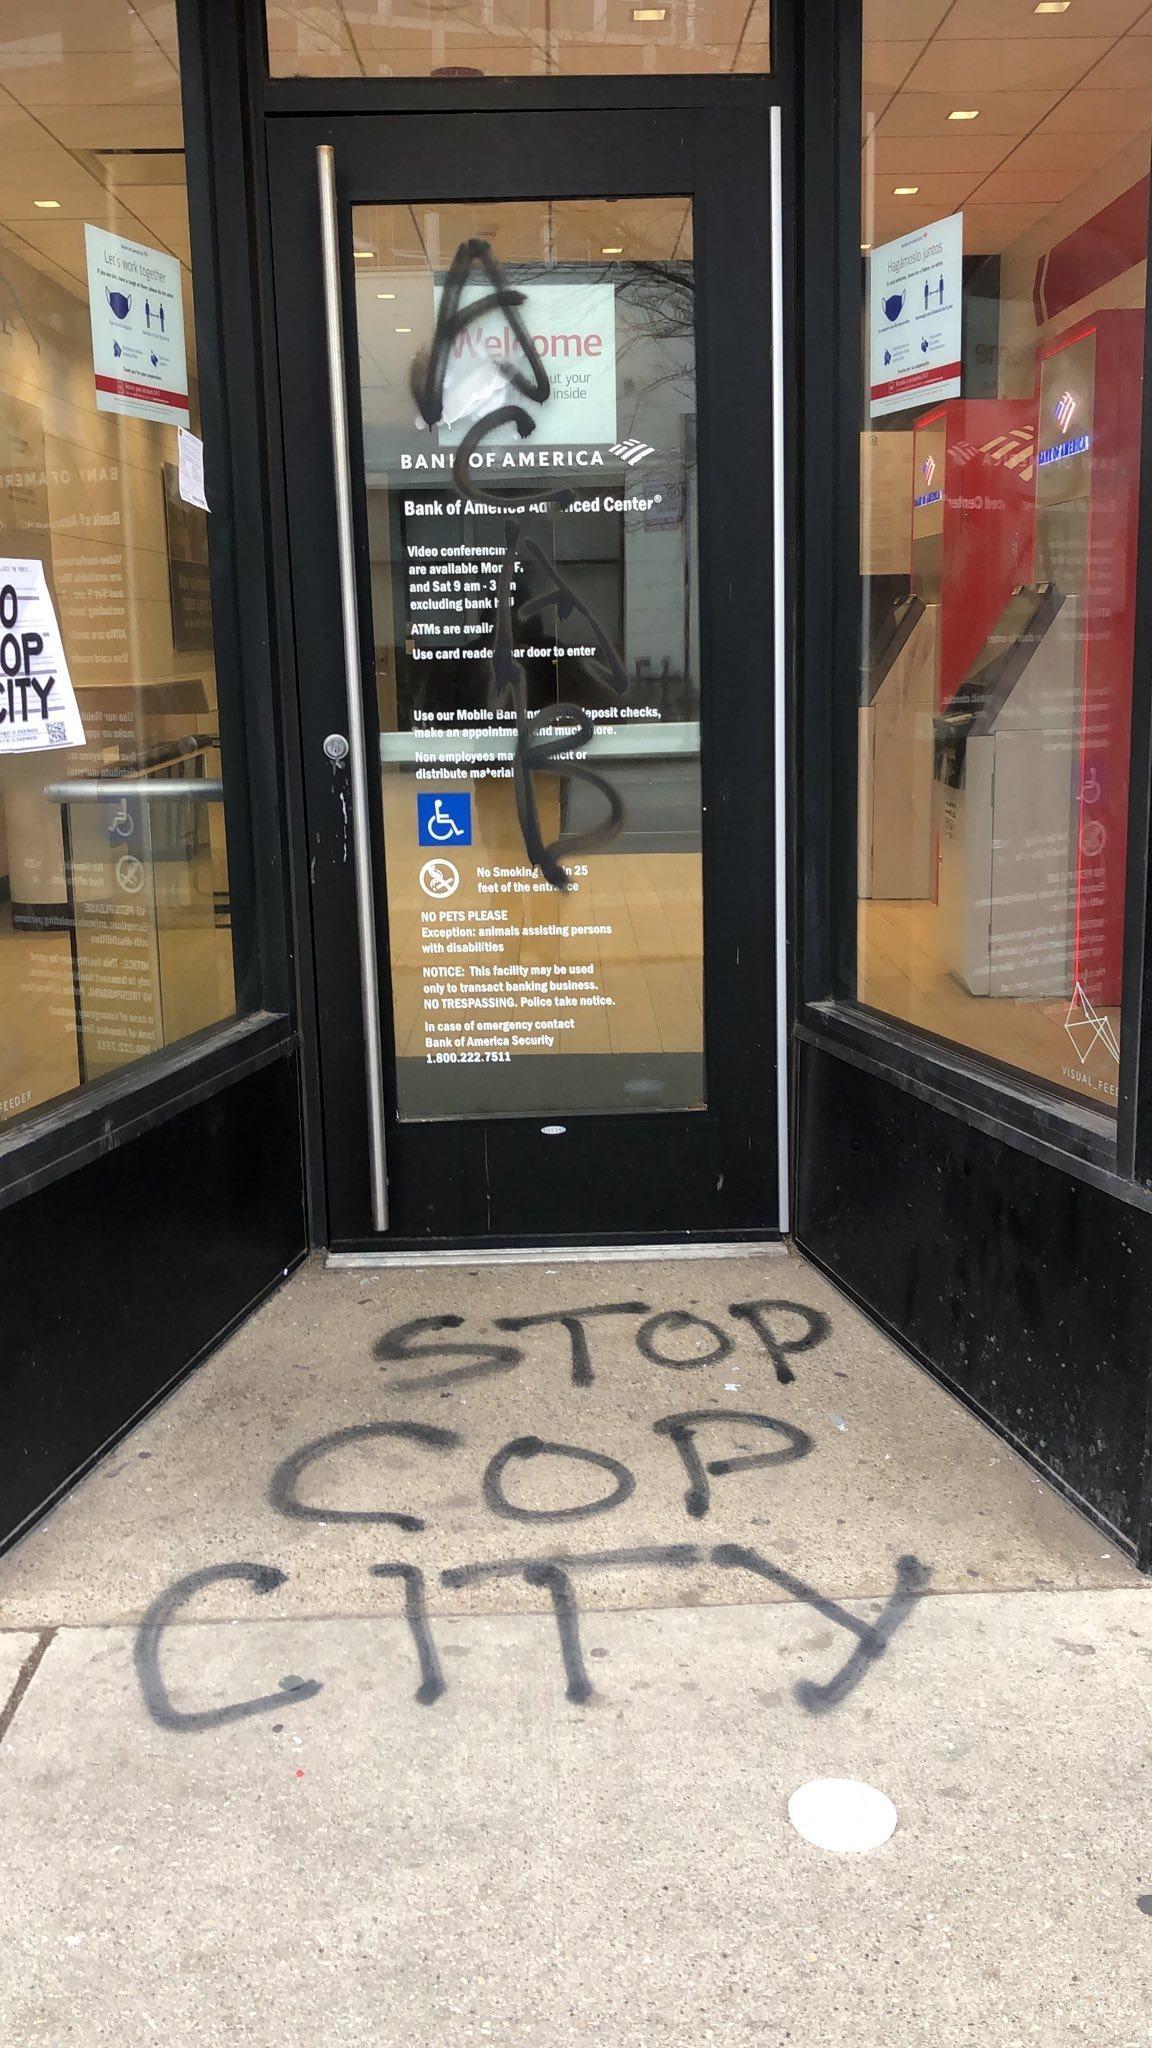 A door is covered in a tag that says "ACAB", and the ground says "NO COP CITY" in black spray paint.